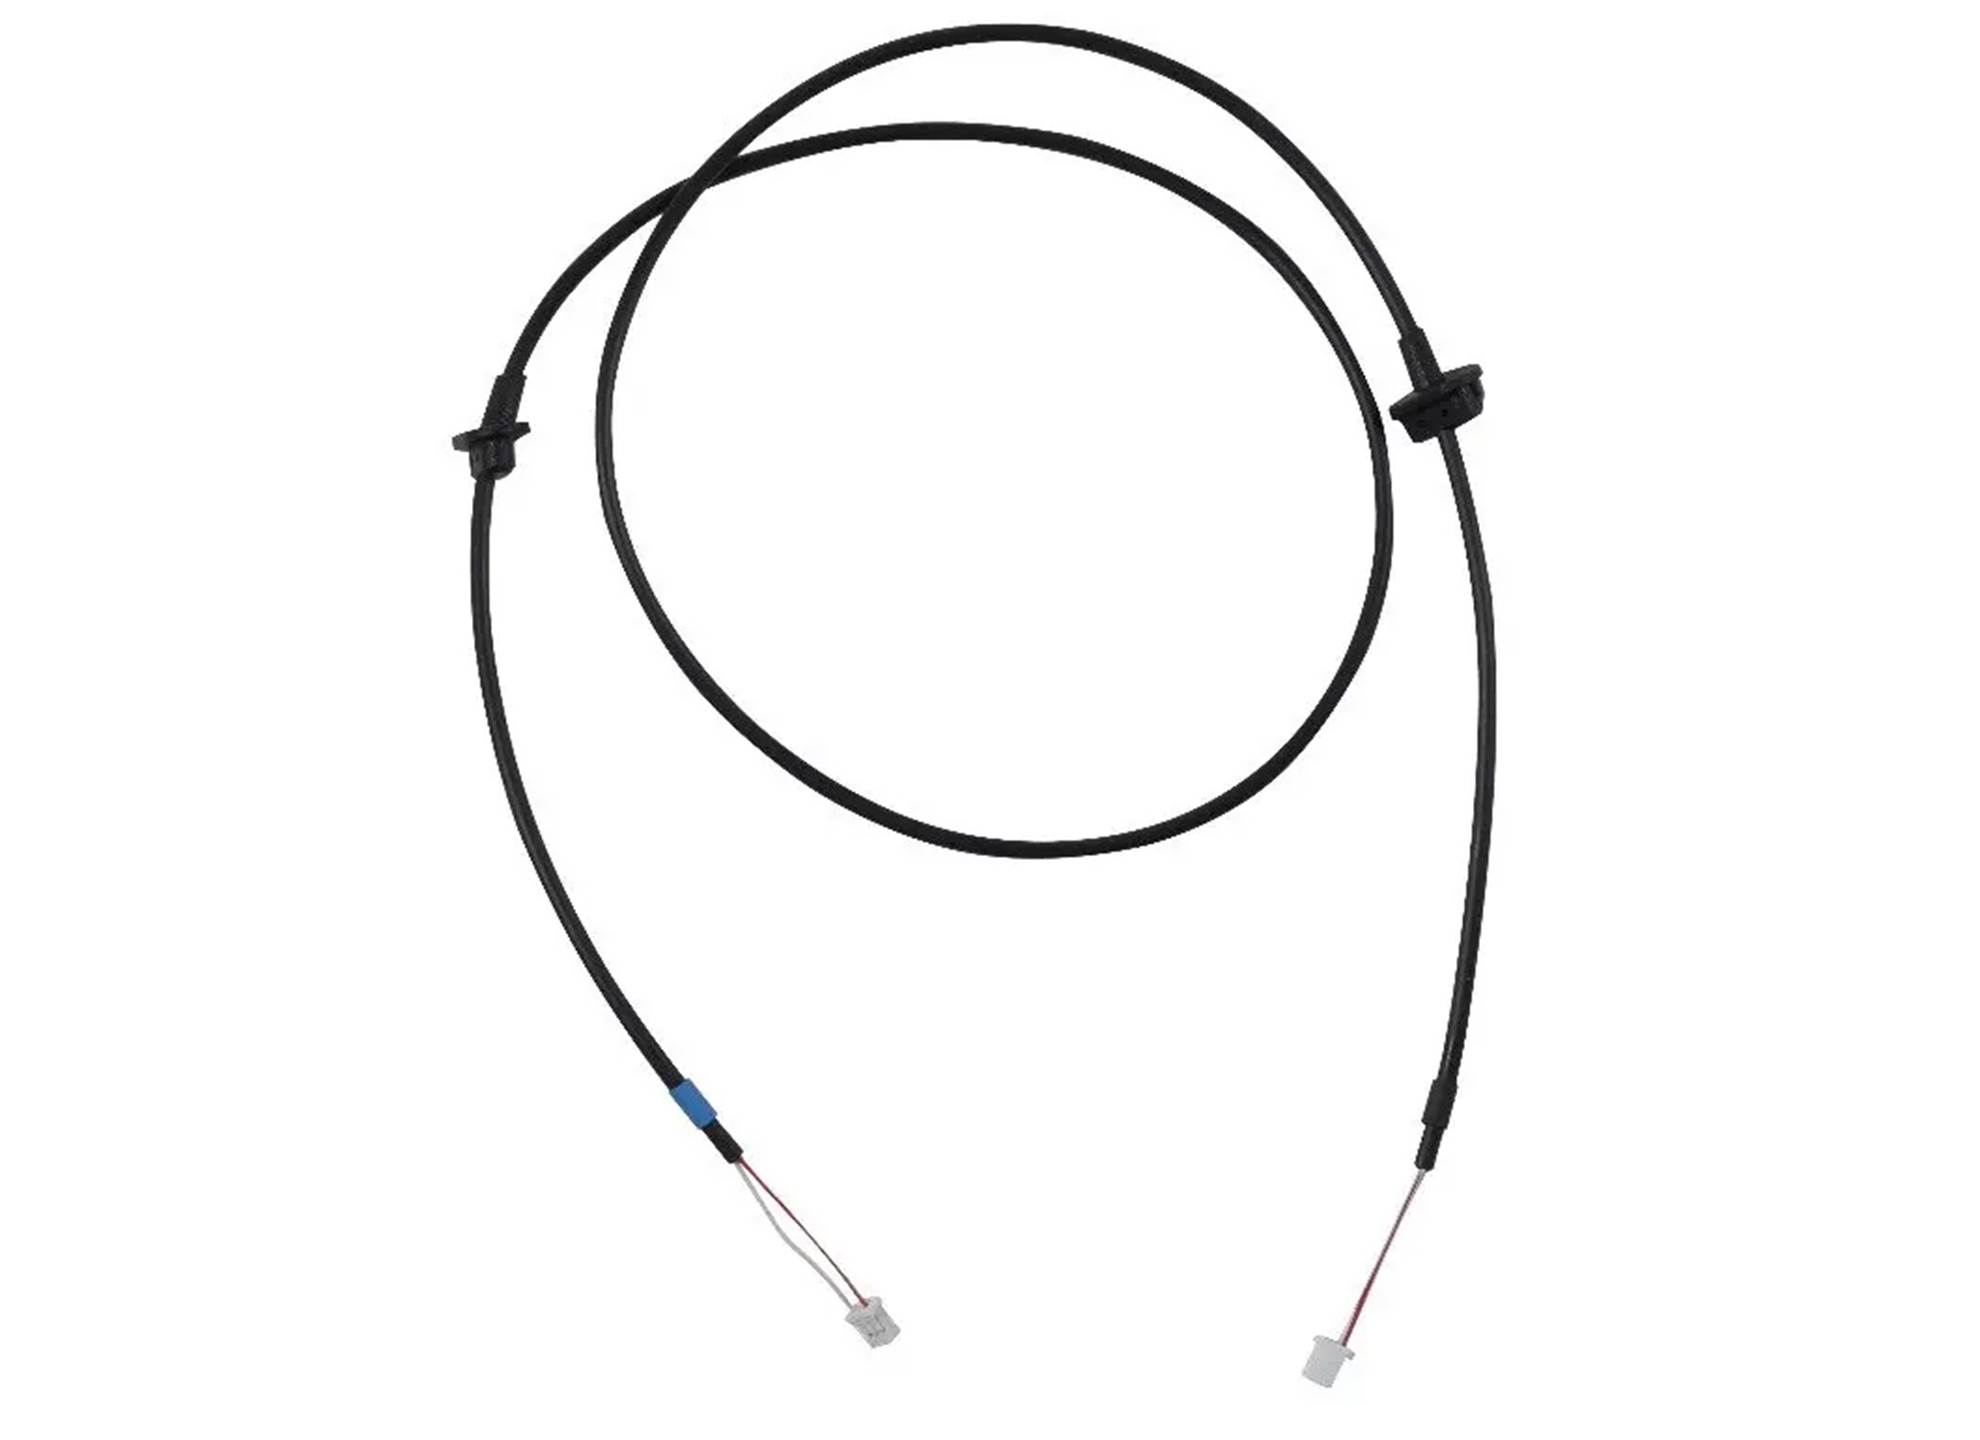 DT1770 Service Kit cable in the bow